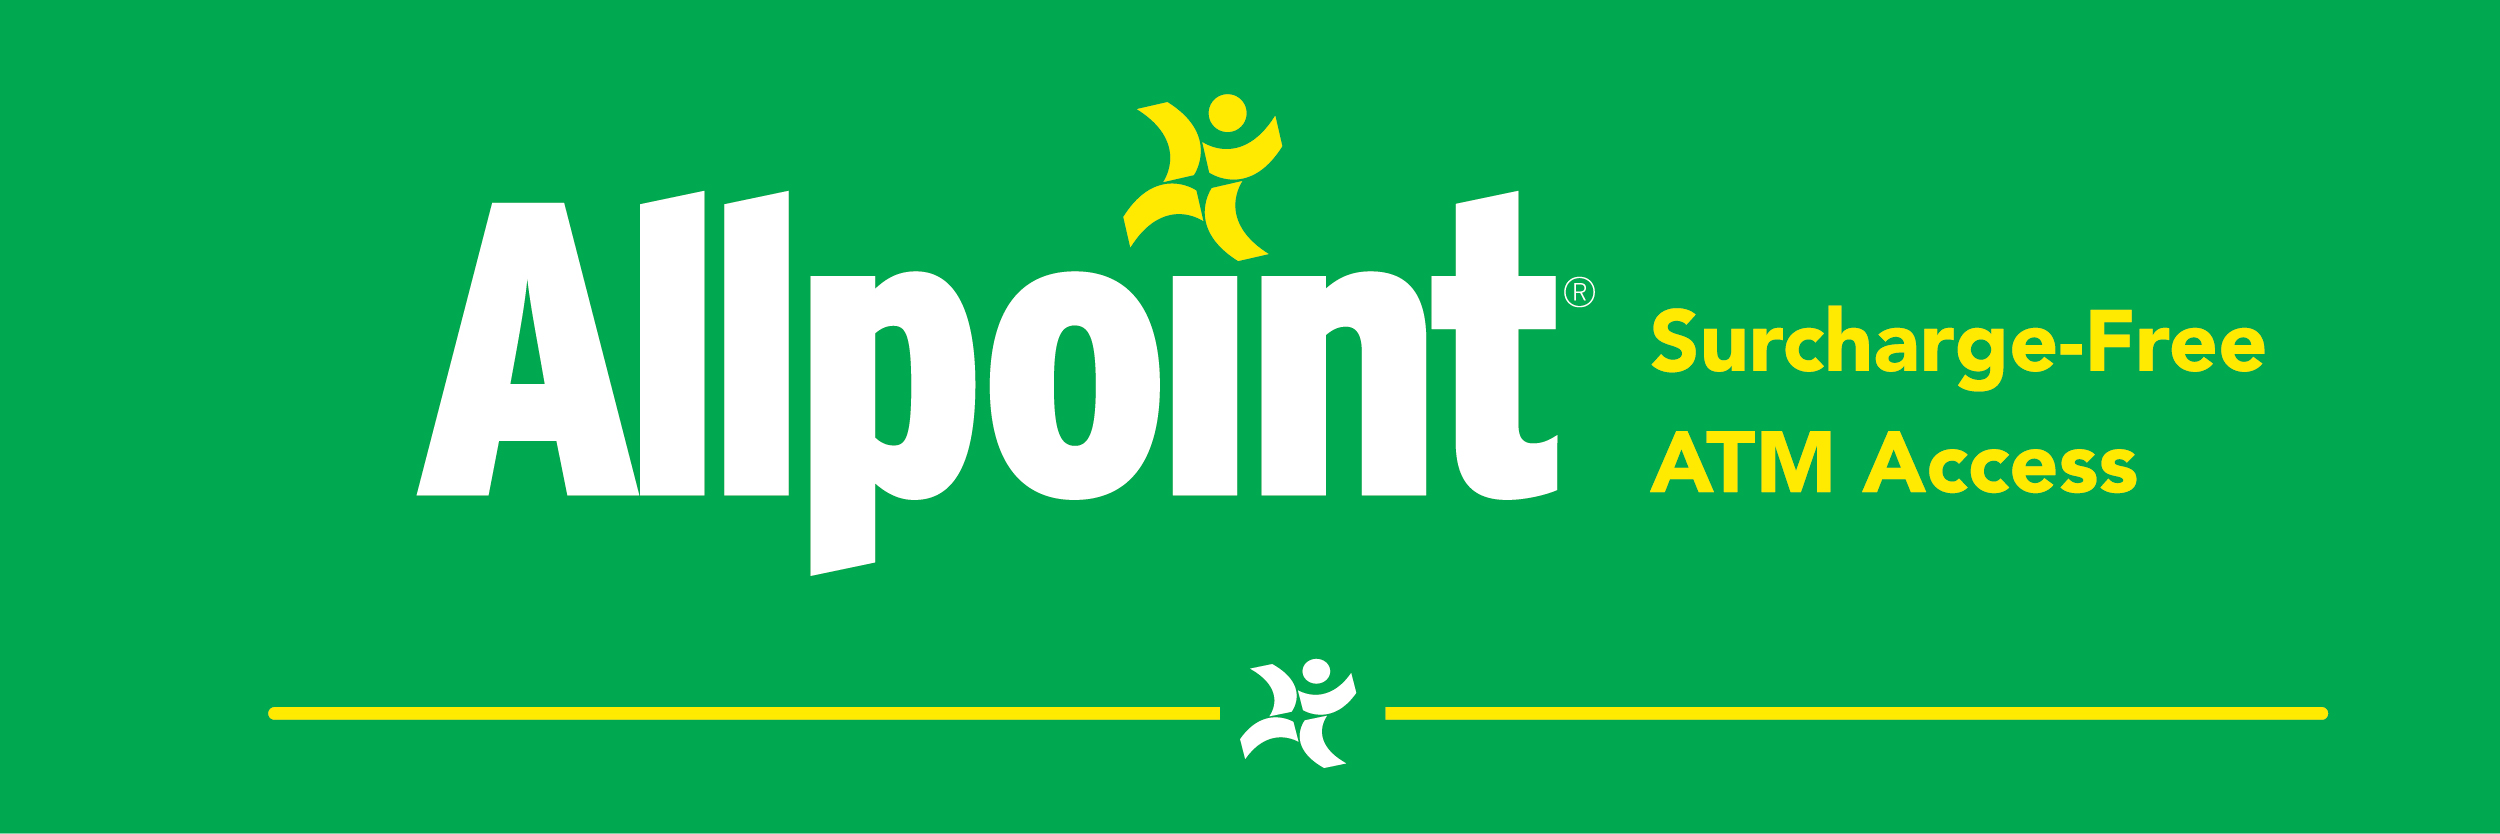 Allpoint Surcharge-Free ATM Access.